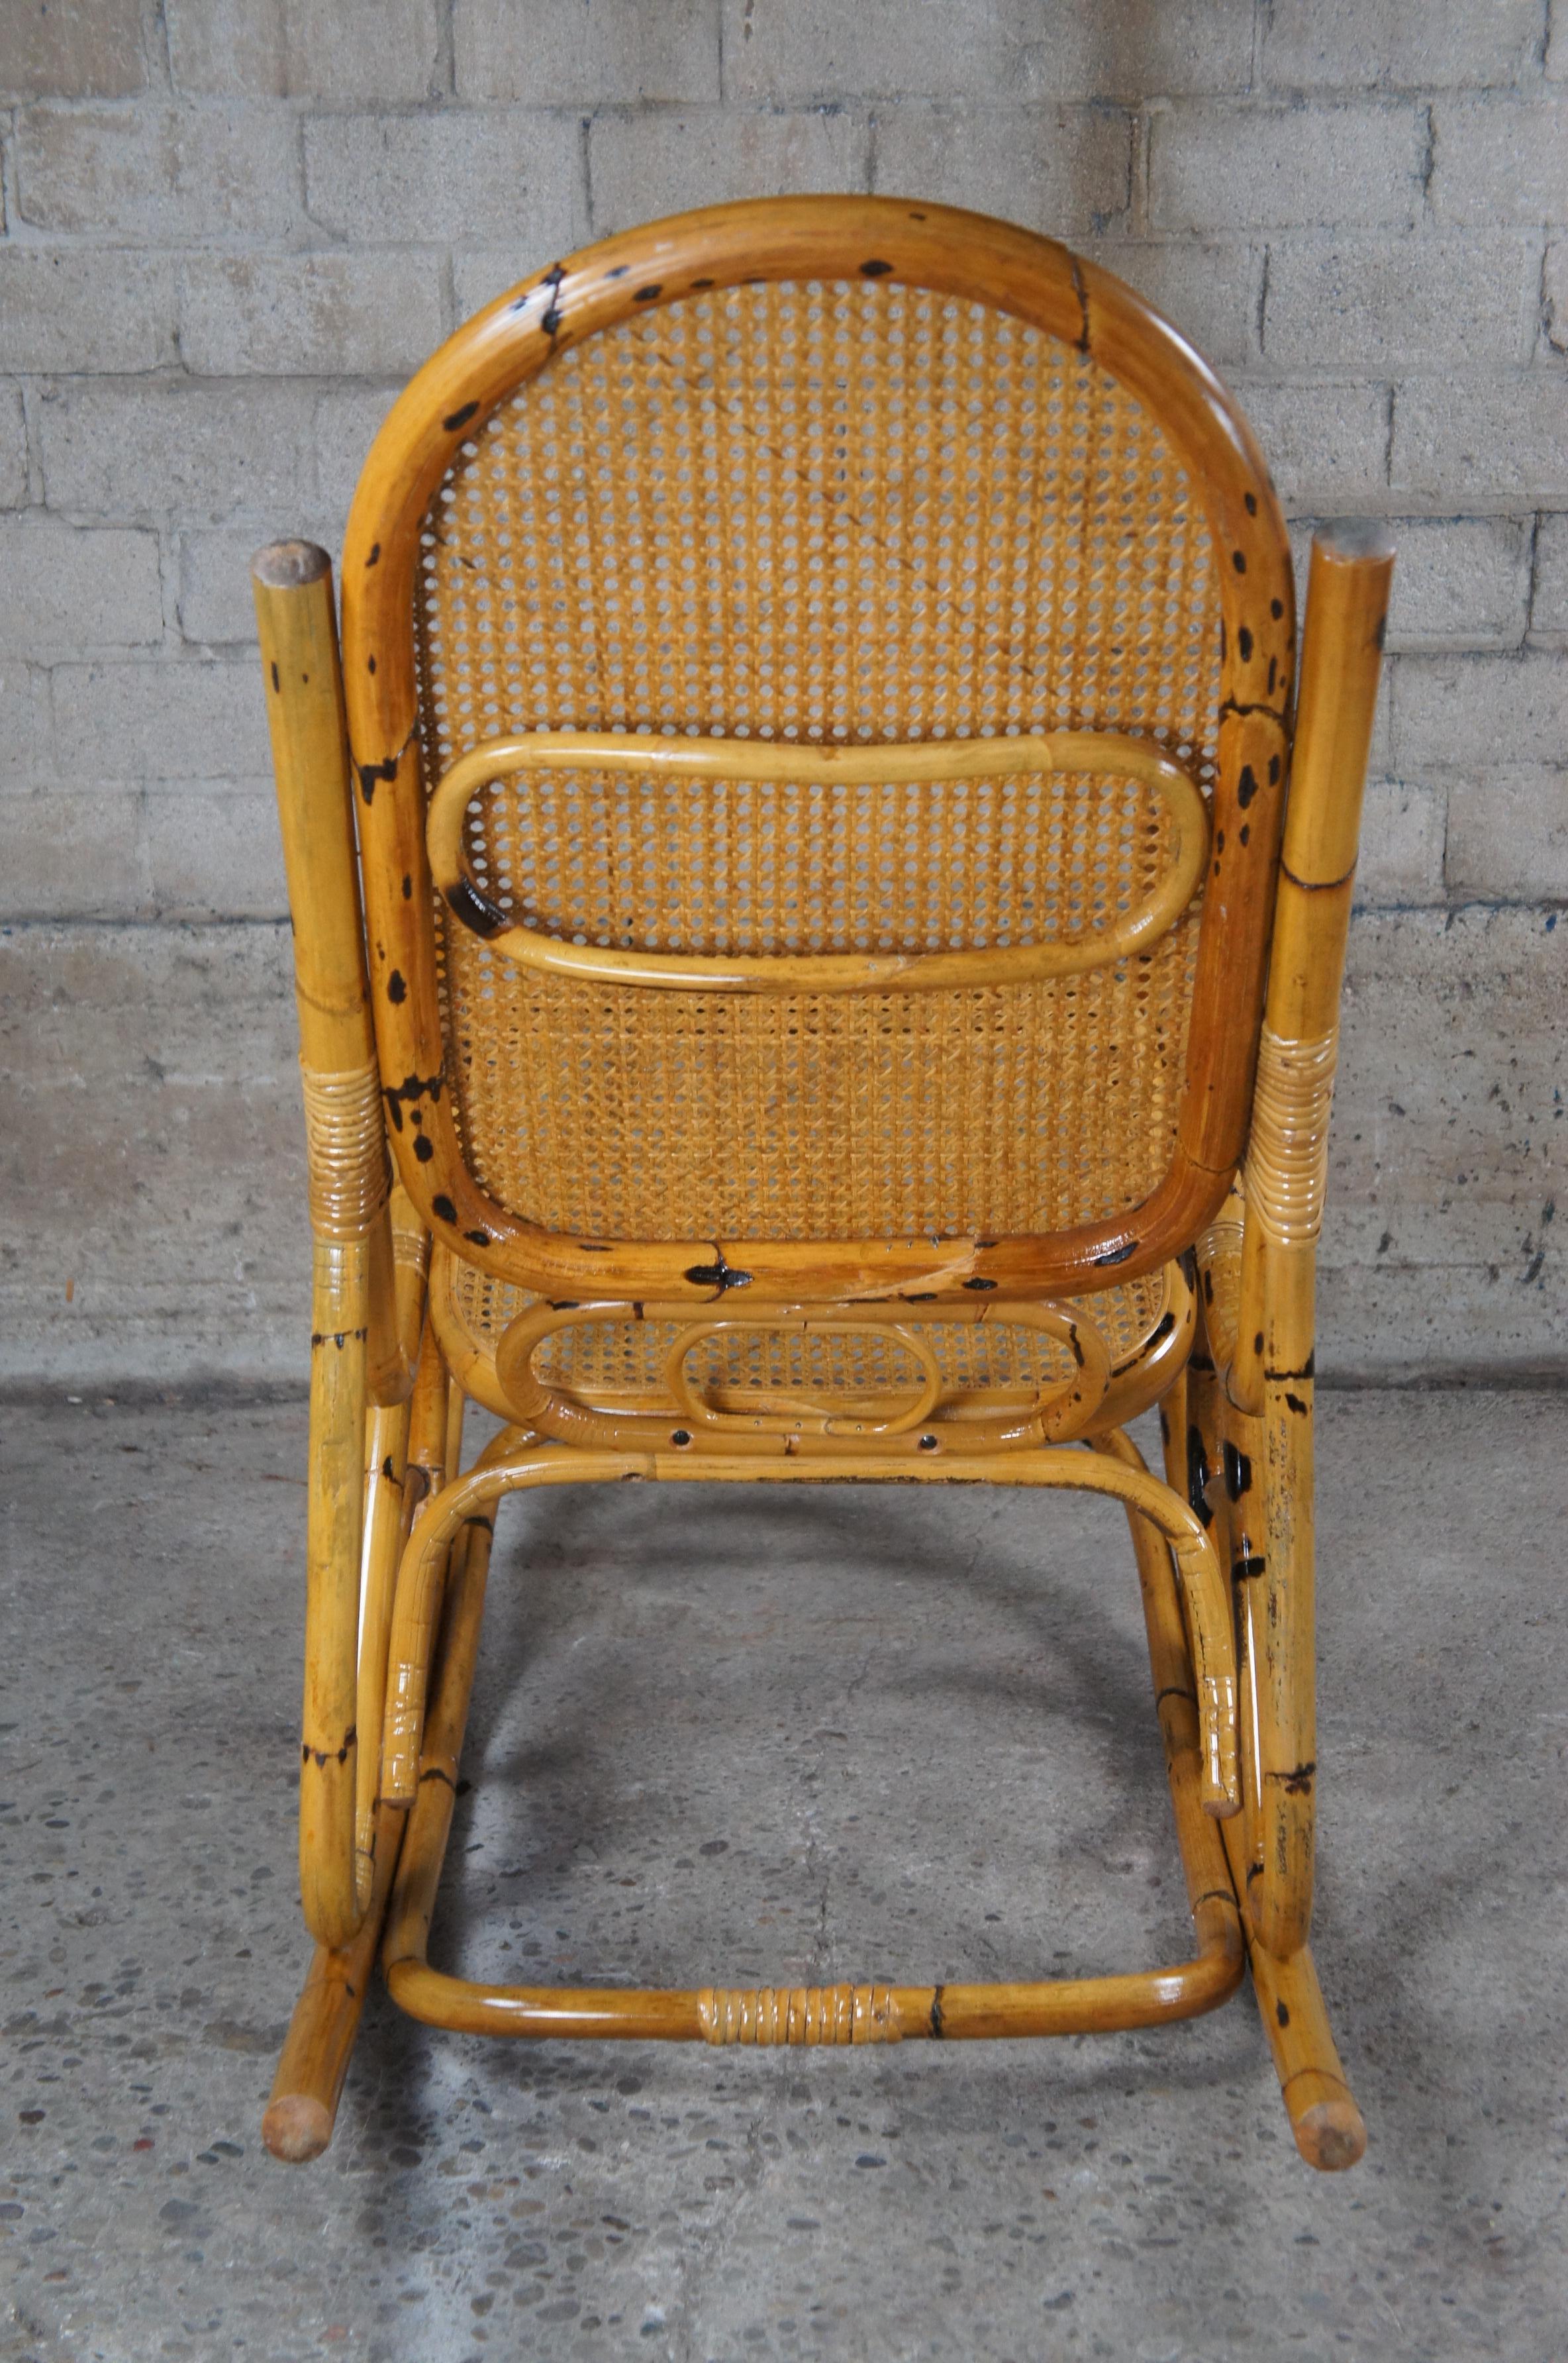 Vintage Thonet Style Large Bamboo Bentwood Cane Rattan Rocking Arm Chair In Good Condition For Sale In Dayton, OH